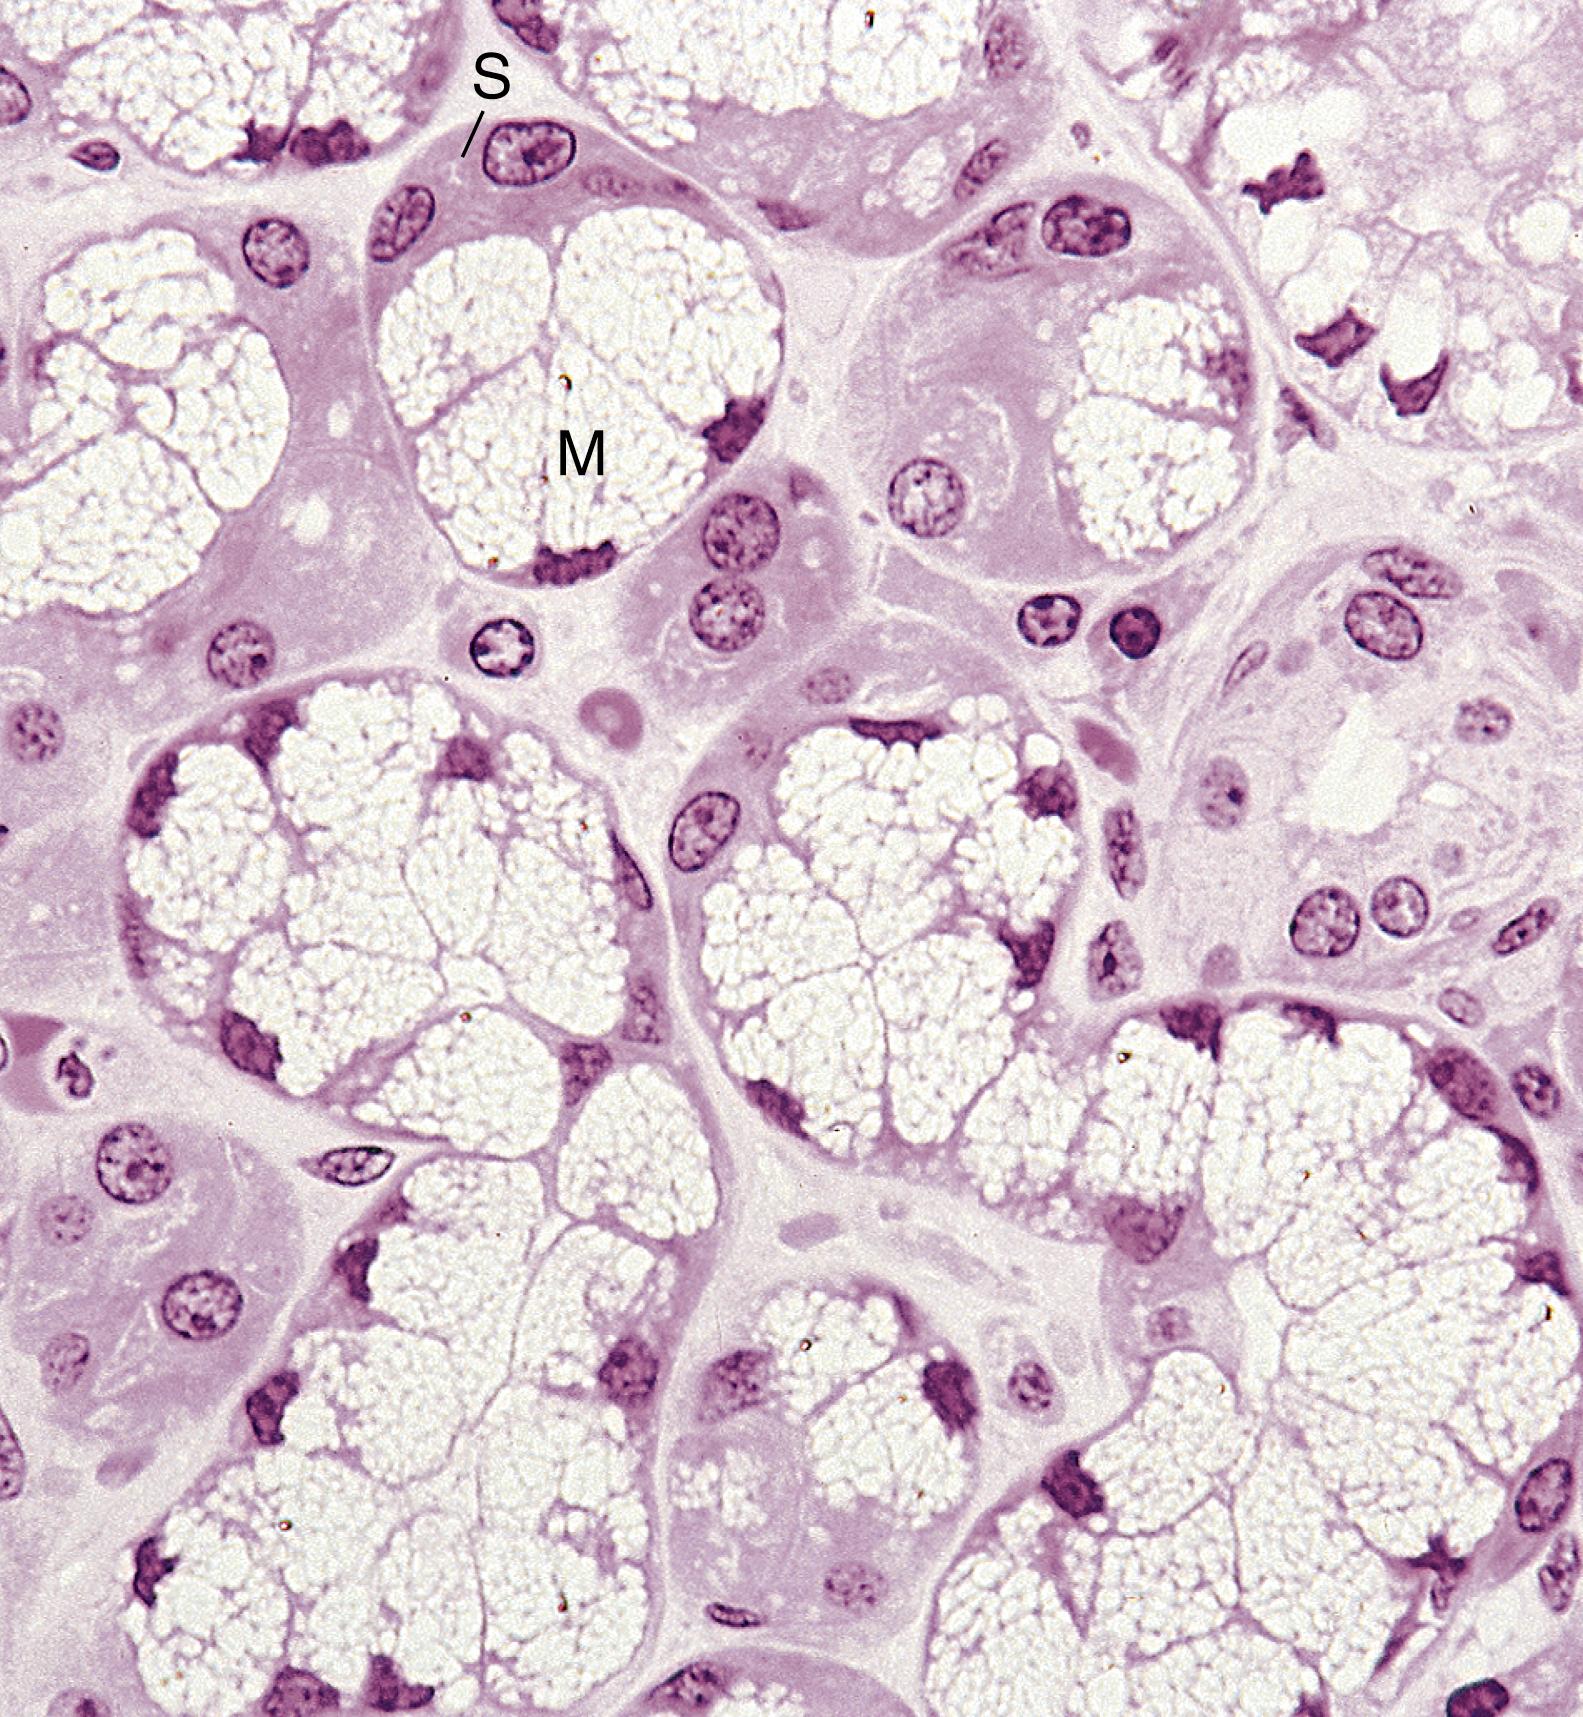 Fig. 18.2, Photomicrograph of the monkey sublingual gland displaying mucous acini (M) with serous demilunes (S). Note that serous demilunes may be fixation artifacts. (×540)